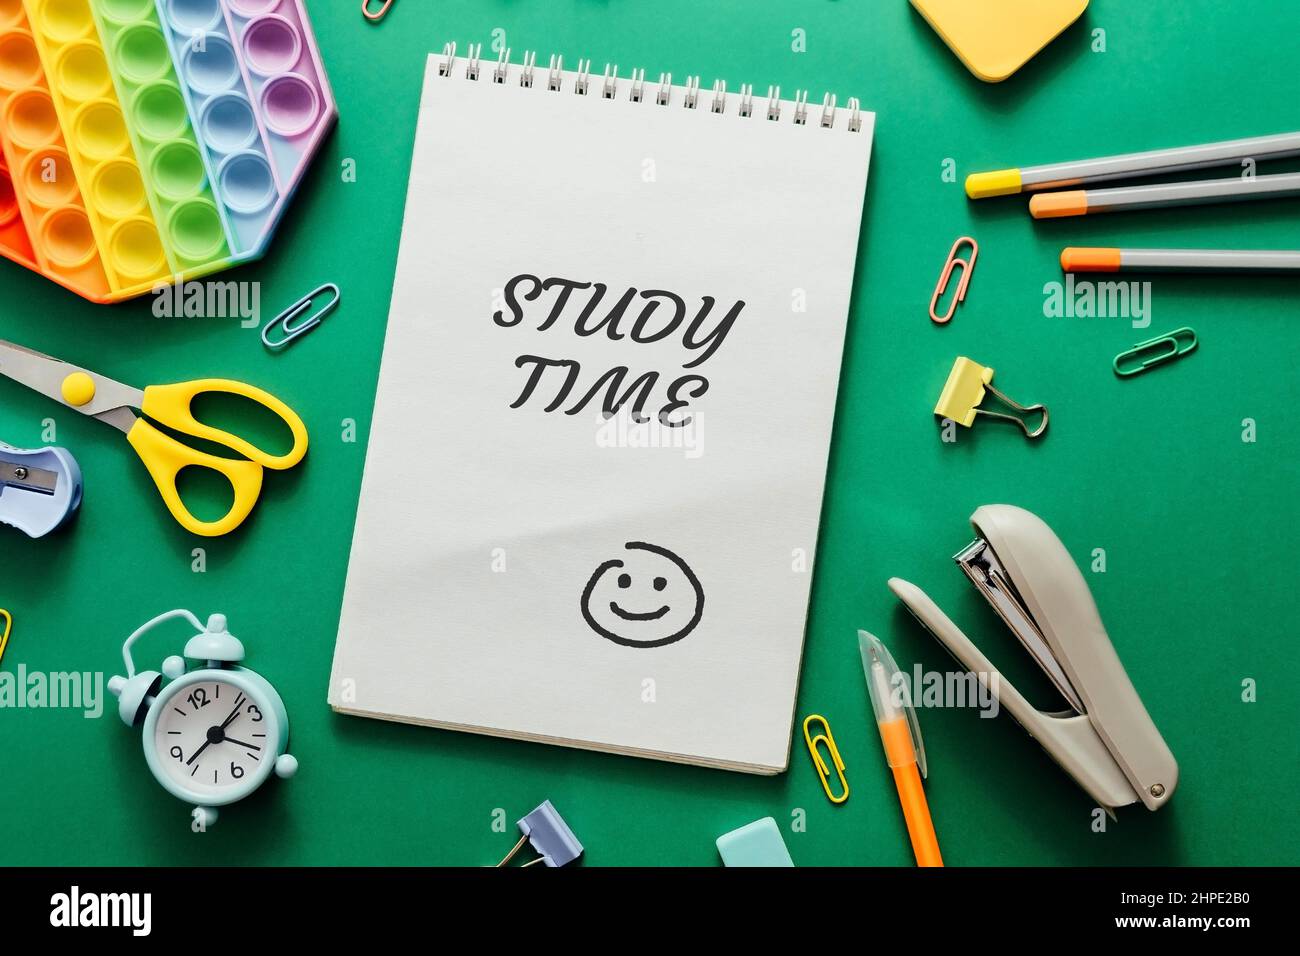 notebook on green background with text Study Time.Colored various school supplies and an alarm clock on a green paper background. Stock Photo